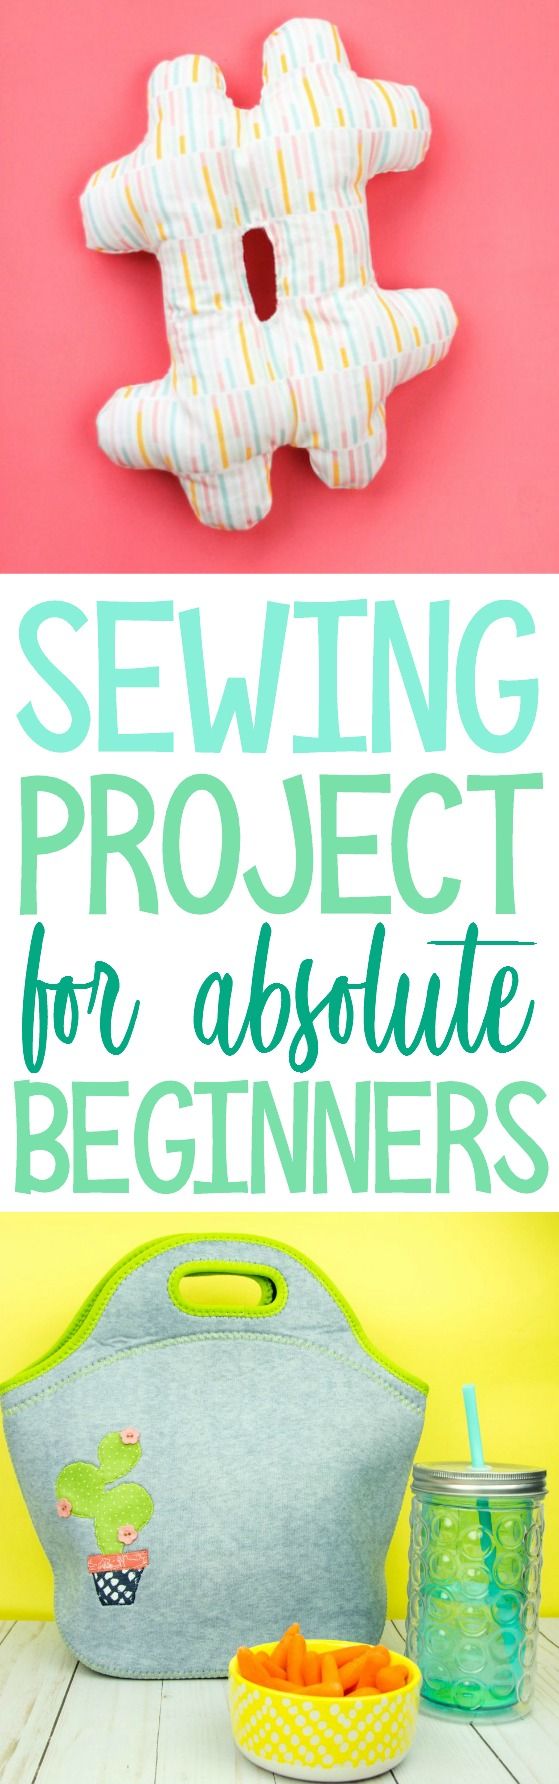 Today, we’re sharing some amazing Sewing Projects for Absolute Beginners that ...